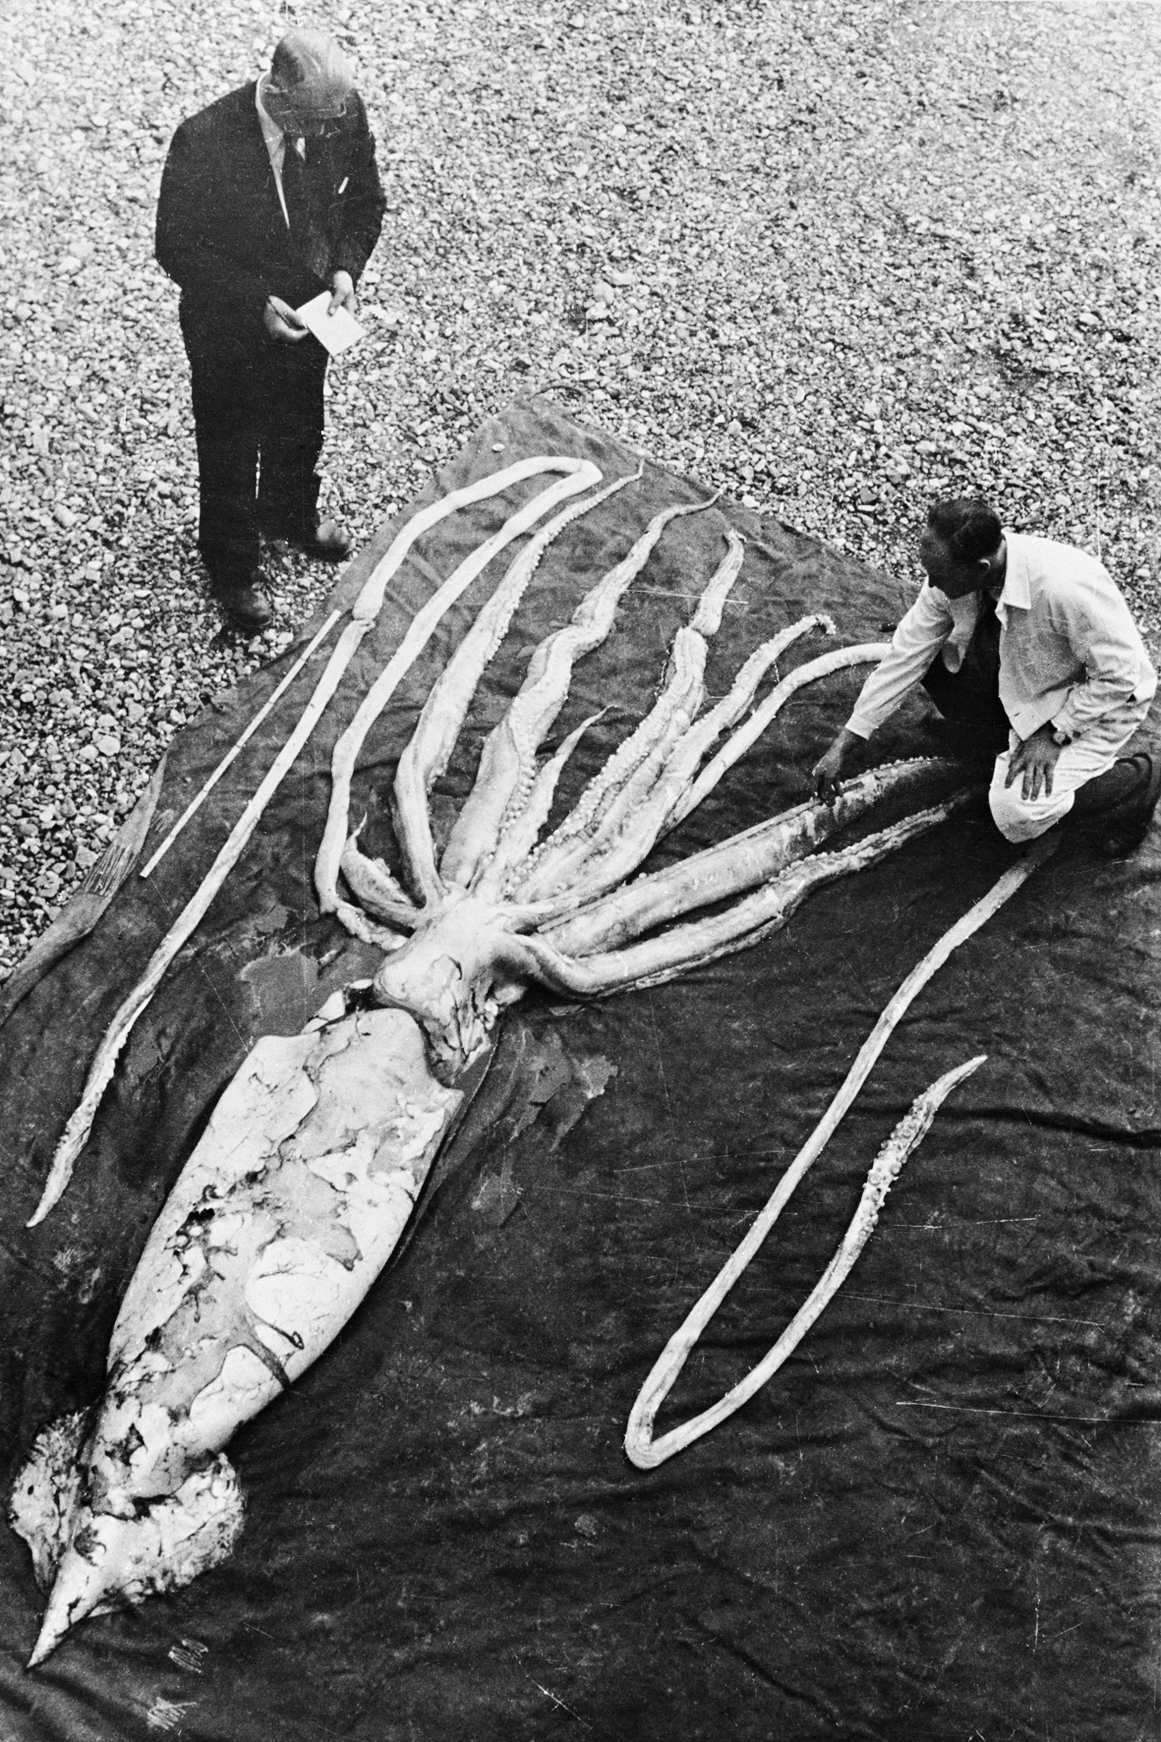 A giant squid found at Ranheim in Trondheim 2 October 1954 is being measured by the Professors Erling Sivertsen and Svein Haftorn. The specimen (second largest cephalopod) was measured to a total length of 9.2 meters. NTNU Museum of Natural history and Archeaology / Wikimedia Commons